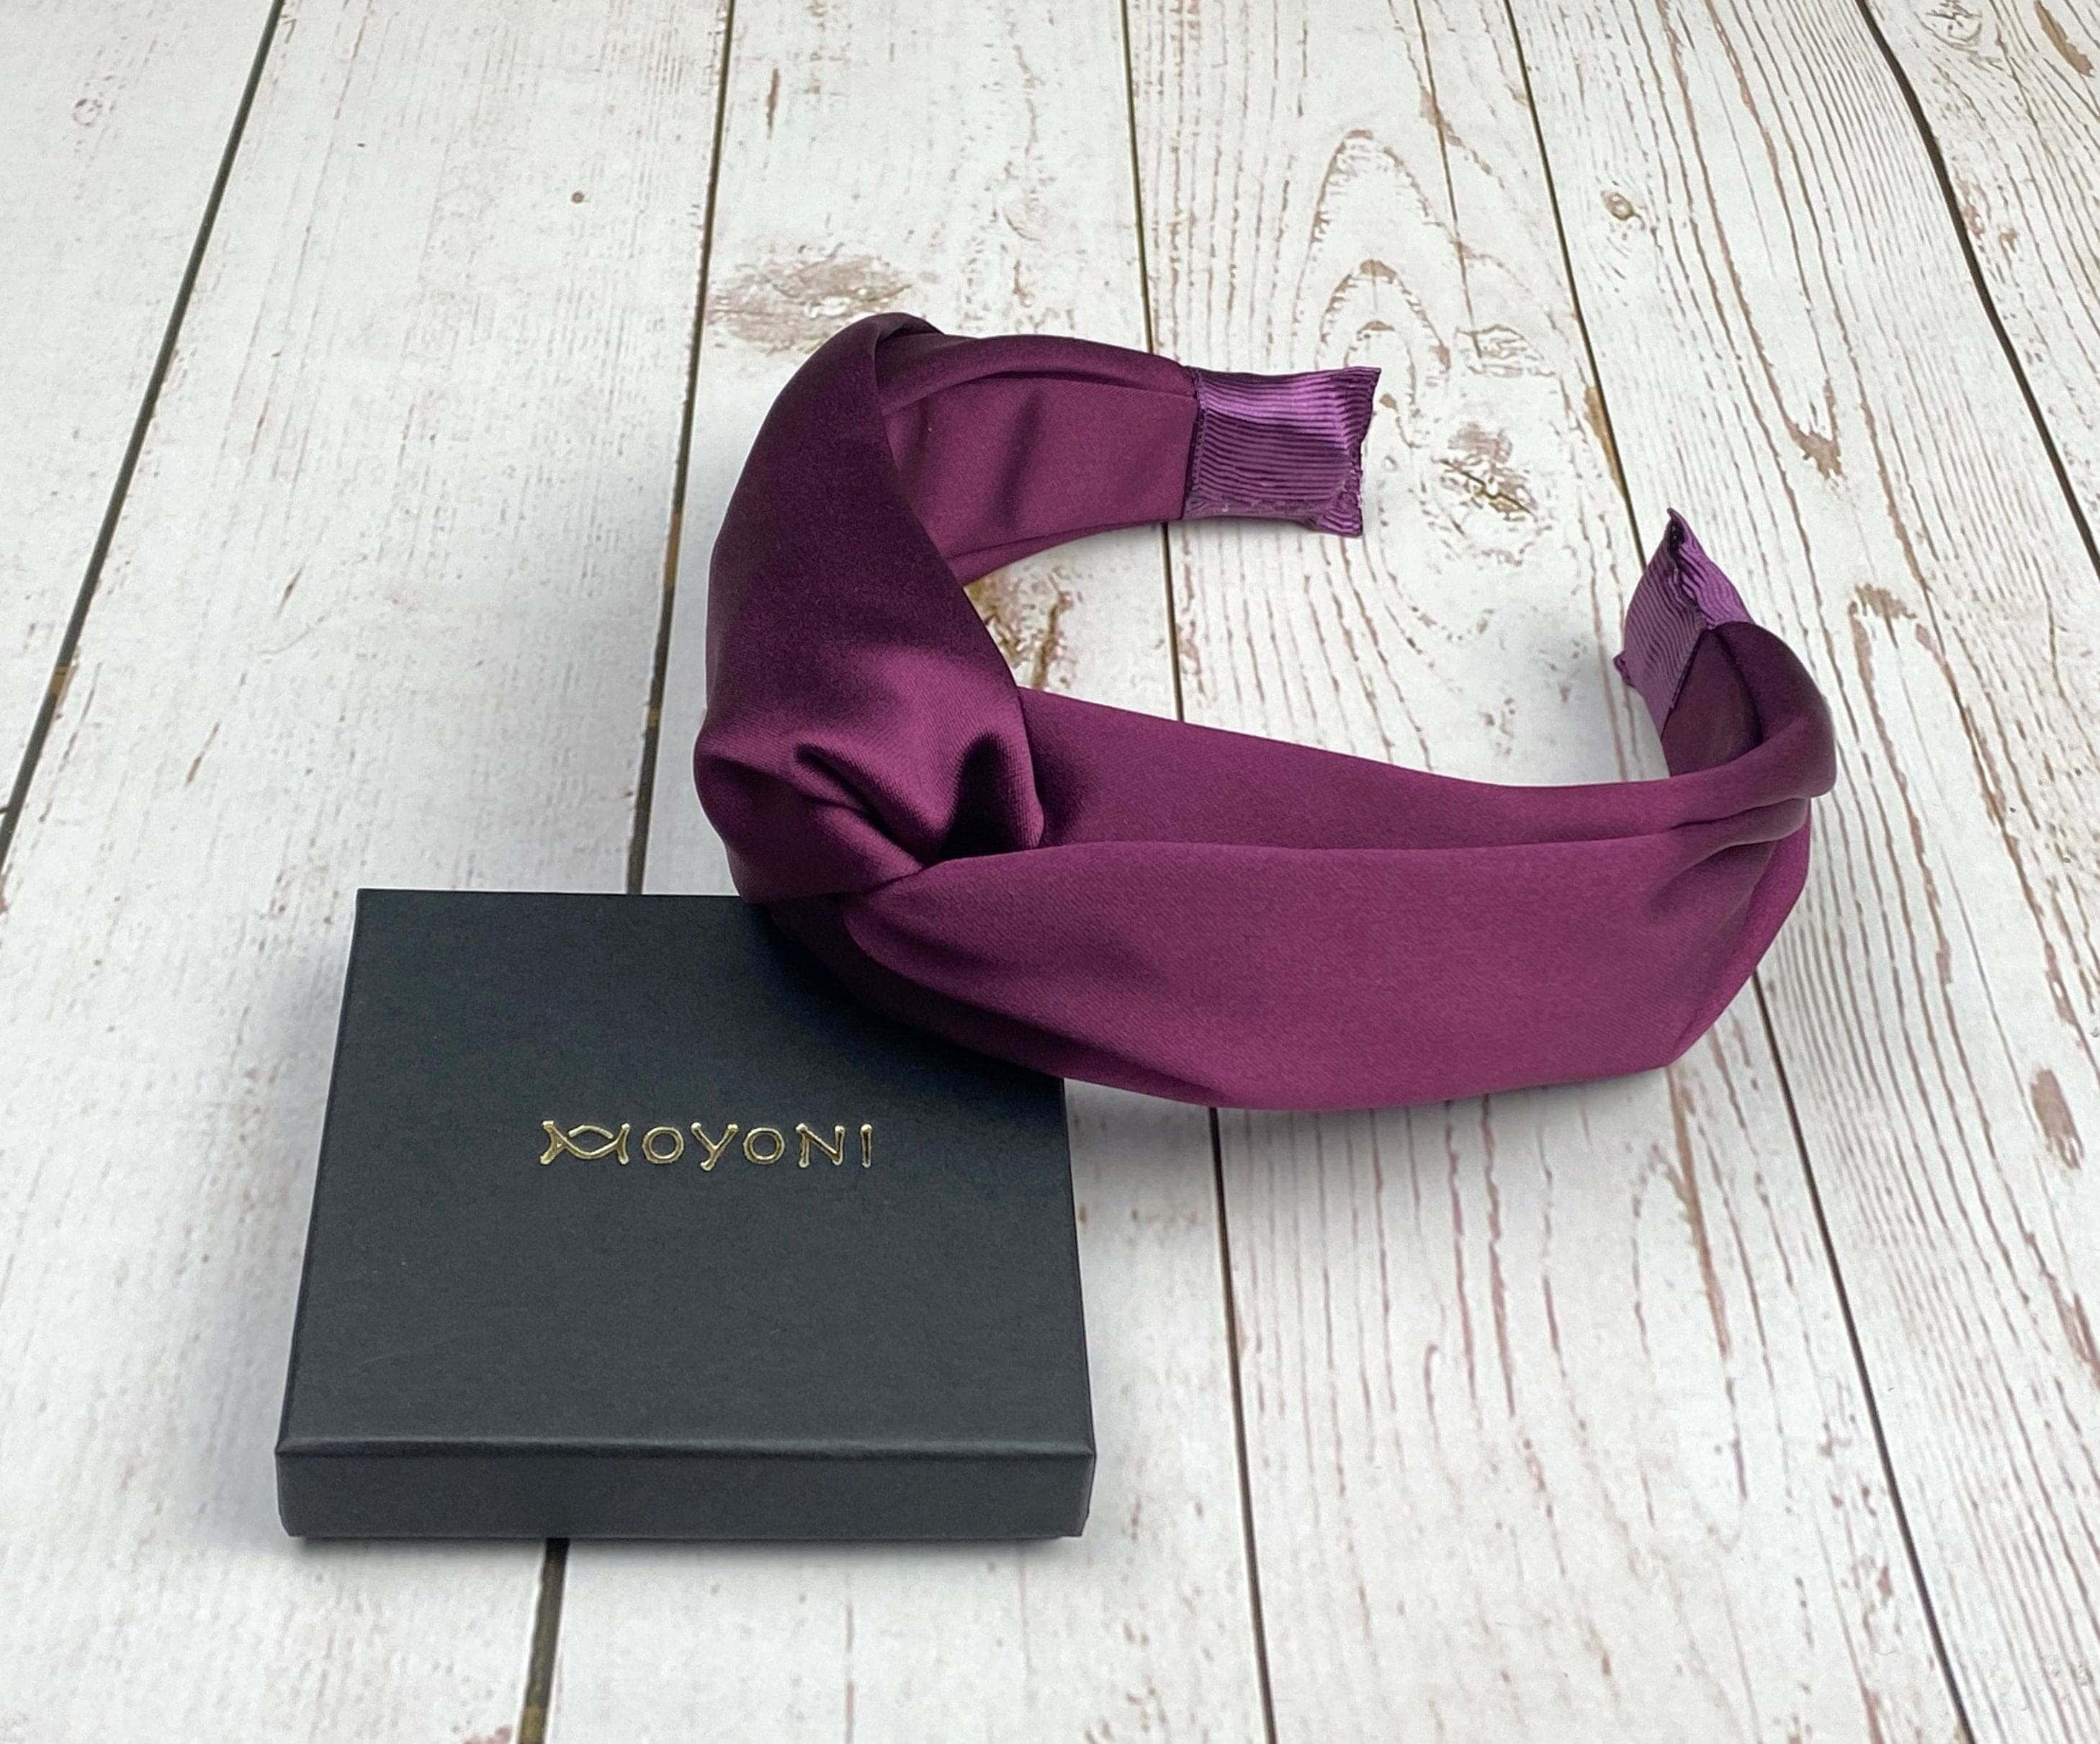 Stay hydrated while on the go with our stylish and comfortable cotton headbands that are made of soft and distressing fabric that traps sweat and keeps you cool and refreshed all day long.